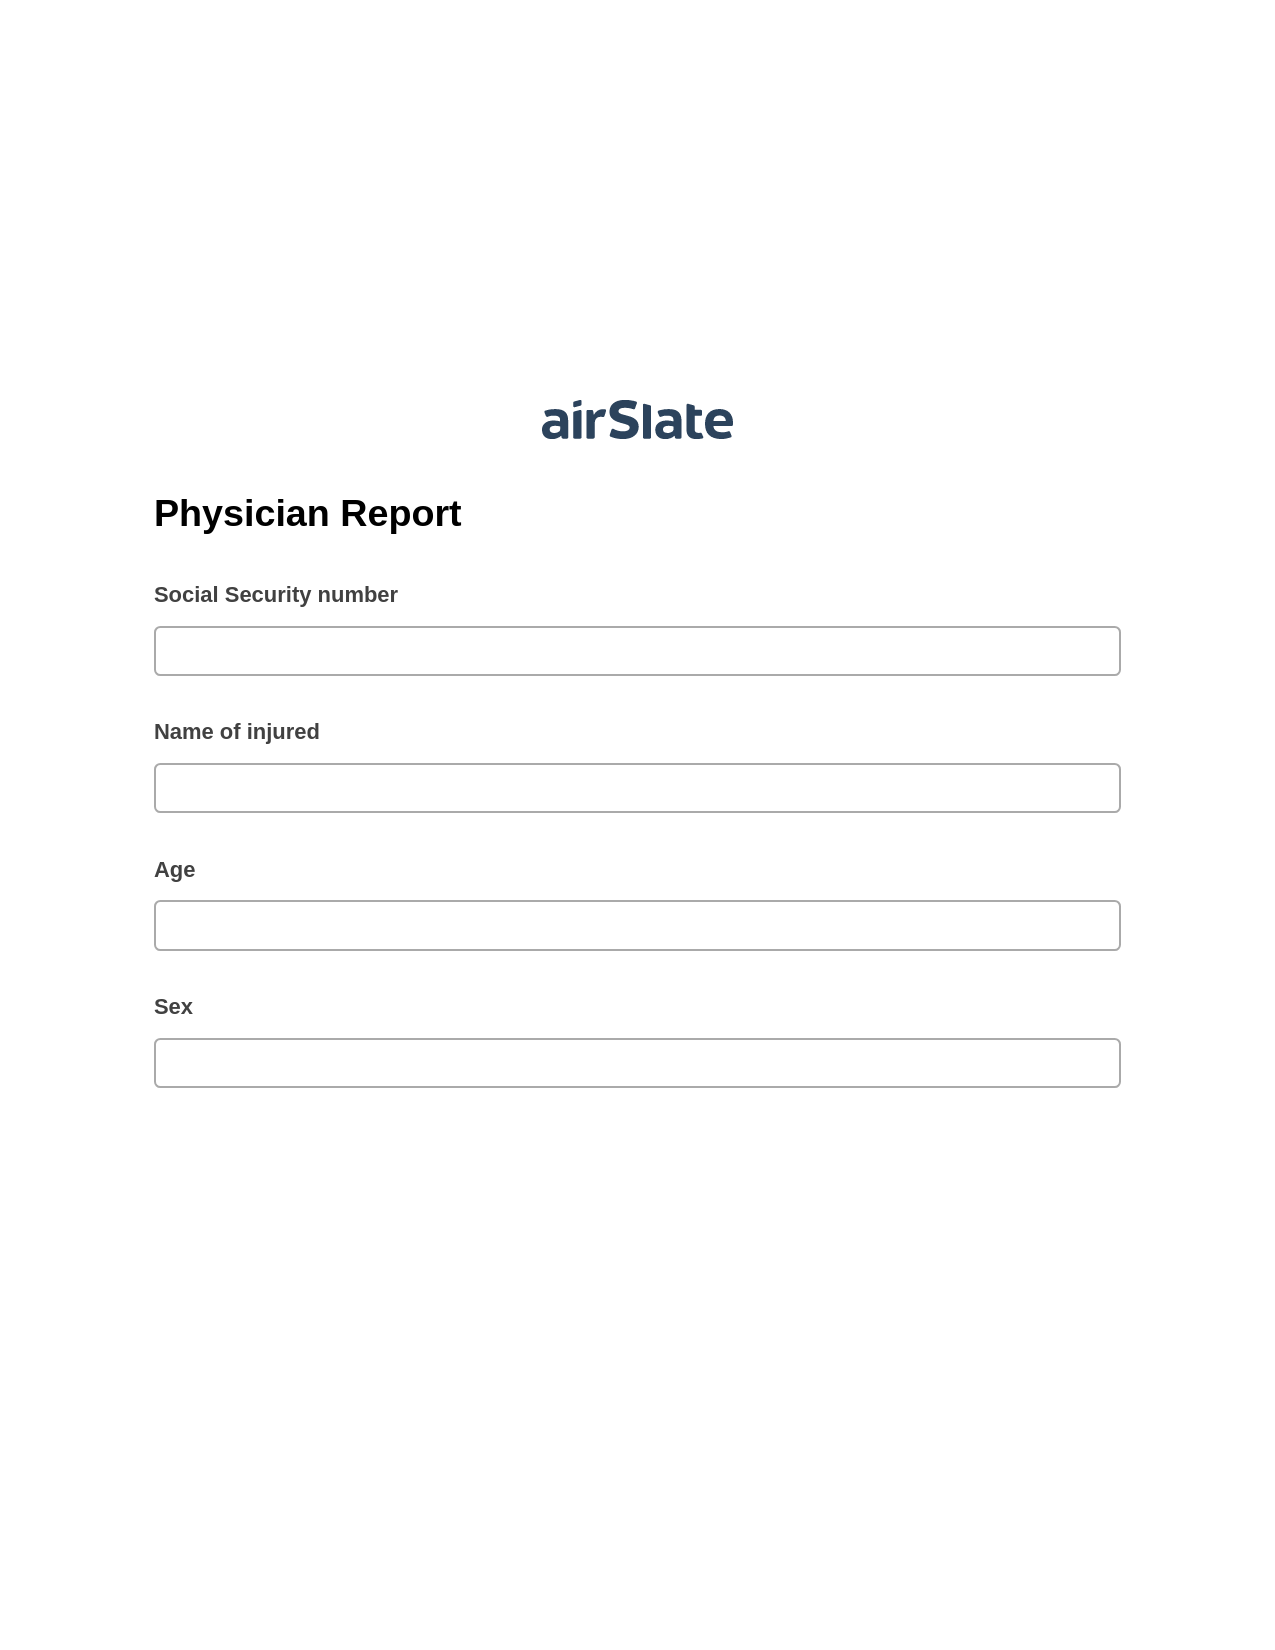 Physician Report Prefill from NetSuite records, Invoke Salesforce Process Bot, Export to MySQL Bot